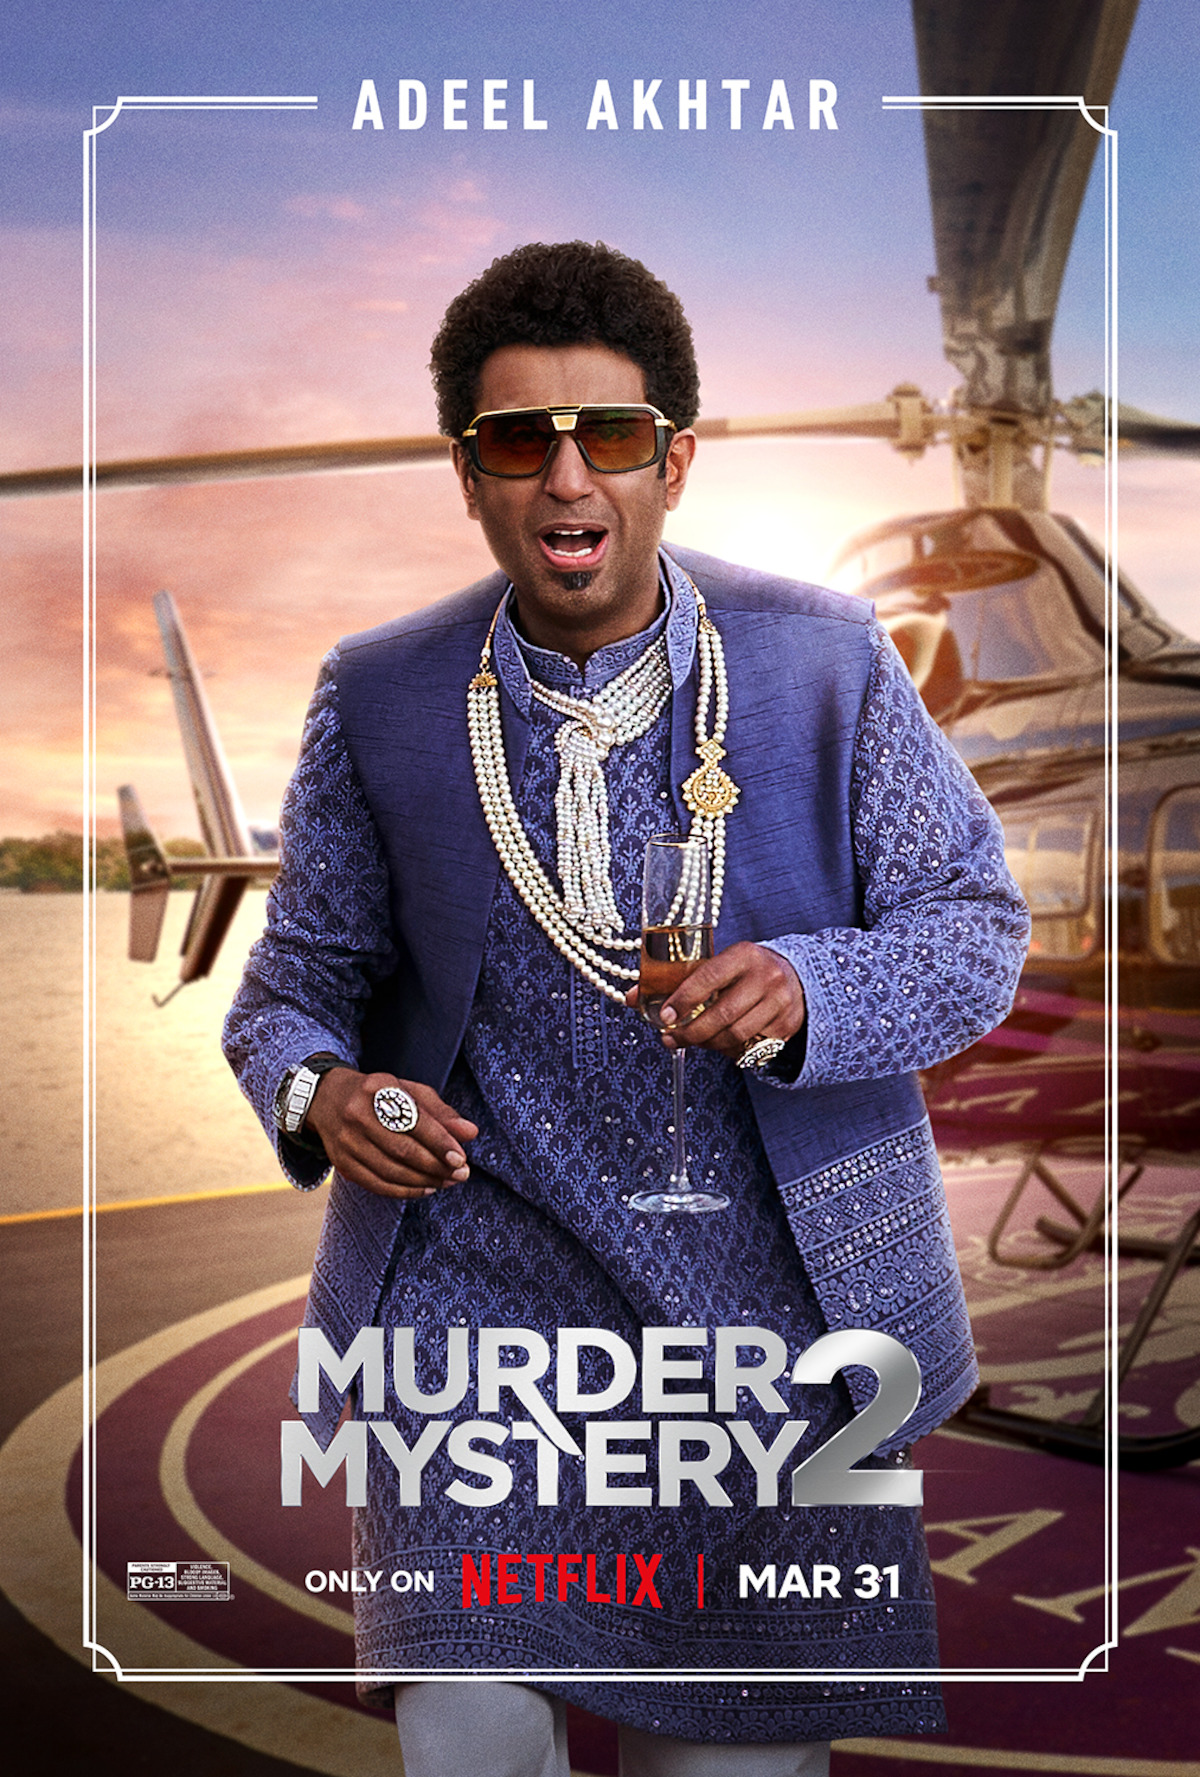 Murder Mystery 2 Cast and Characters: List of Suspects